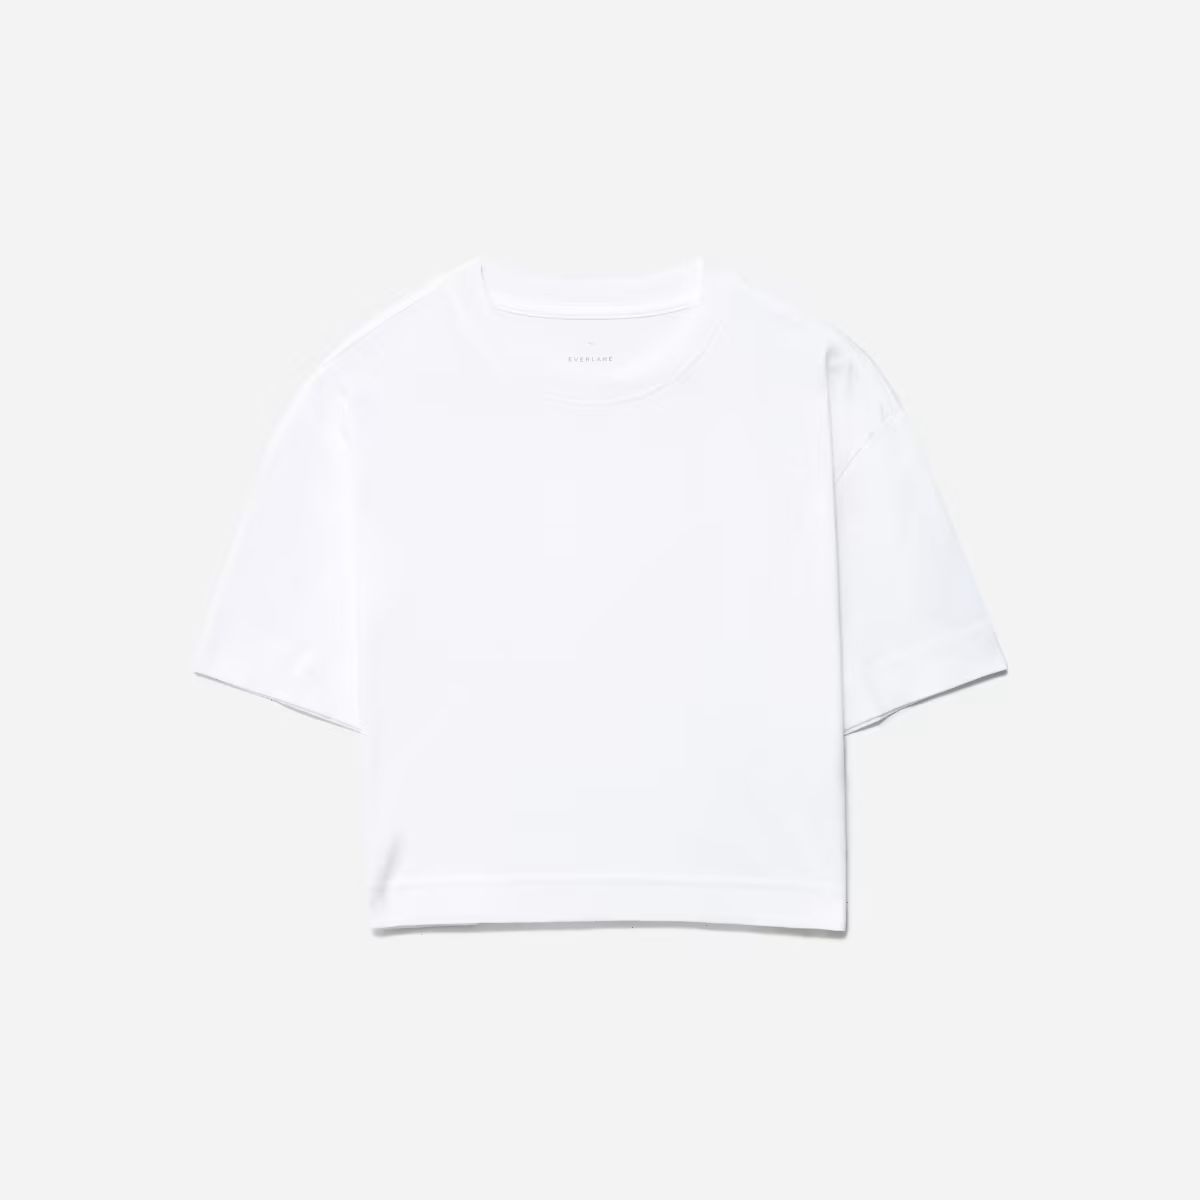 The Organic Cotton Cropped Tee | Everlane